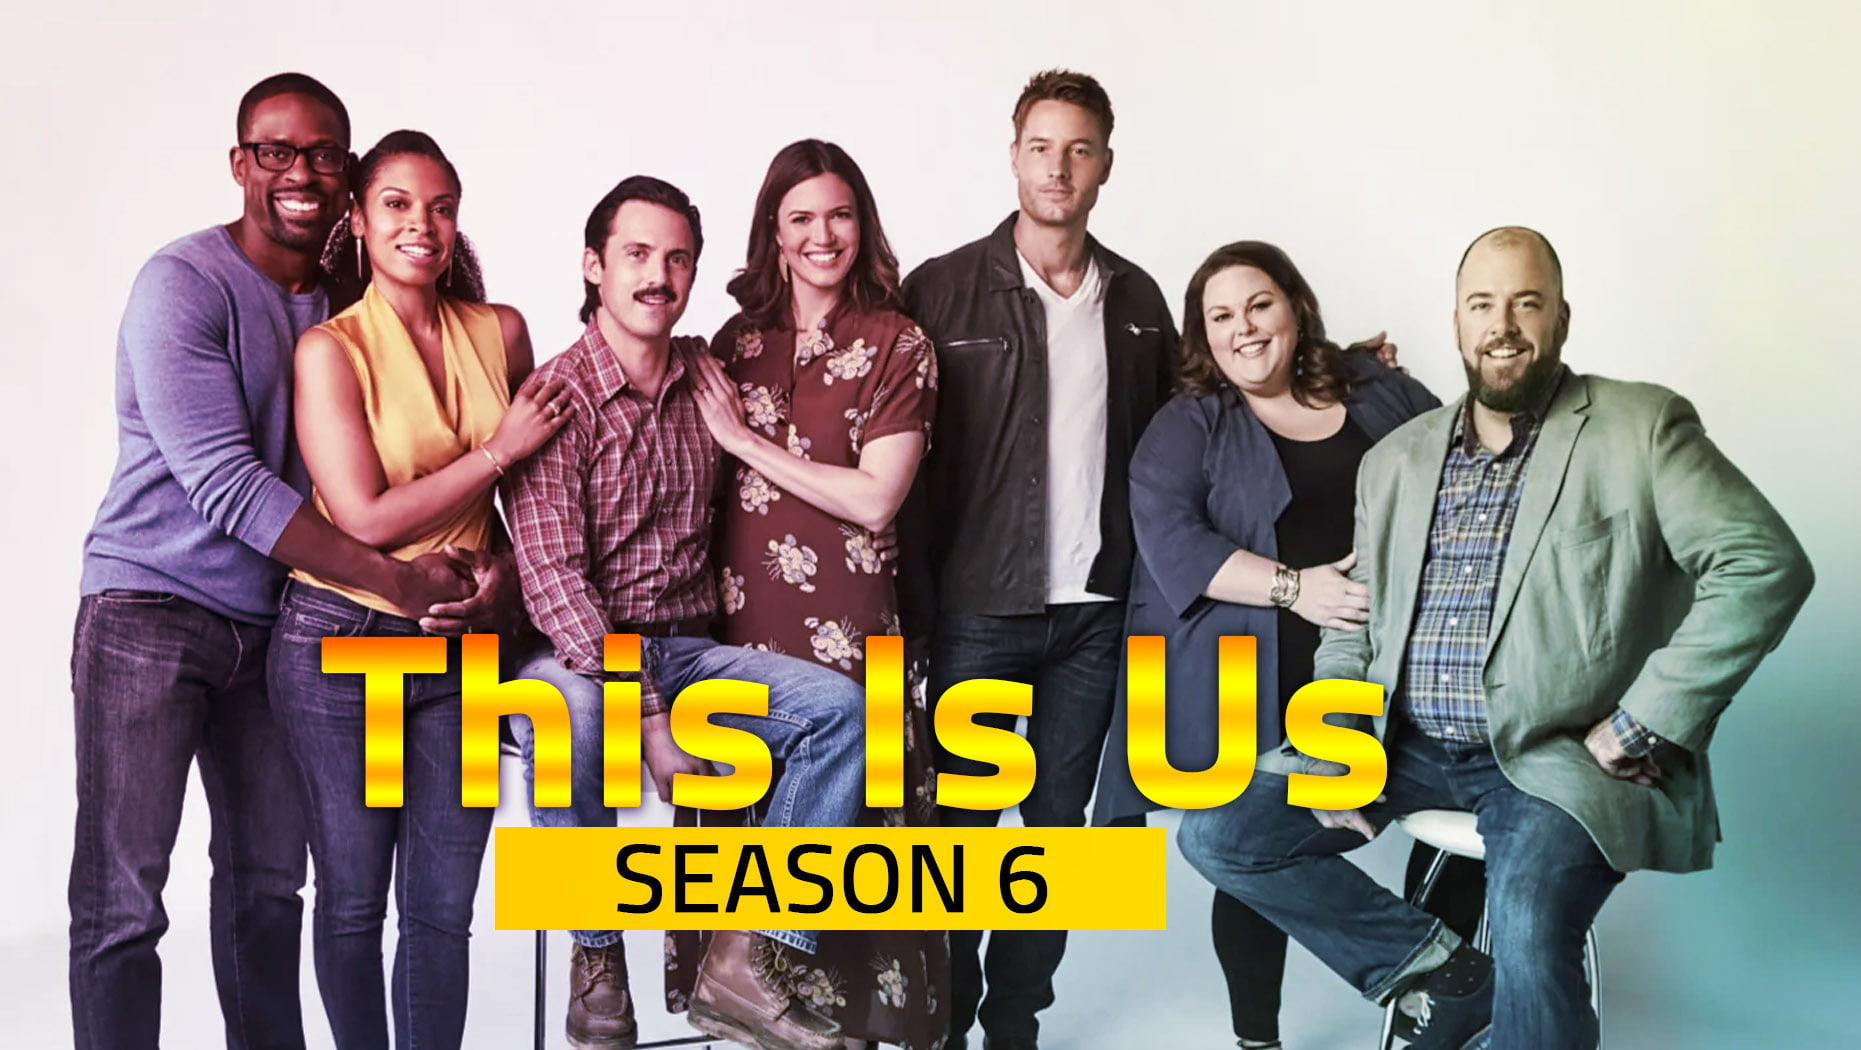 This Is Us Season 6: Release Date? Cast? And Other Details - WTTSPOD